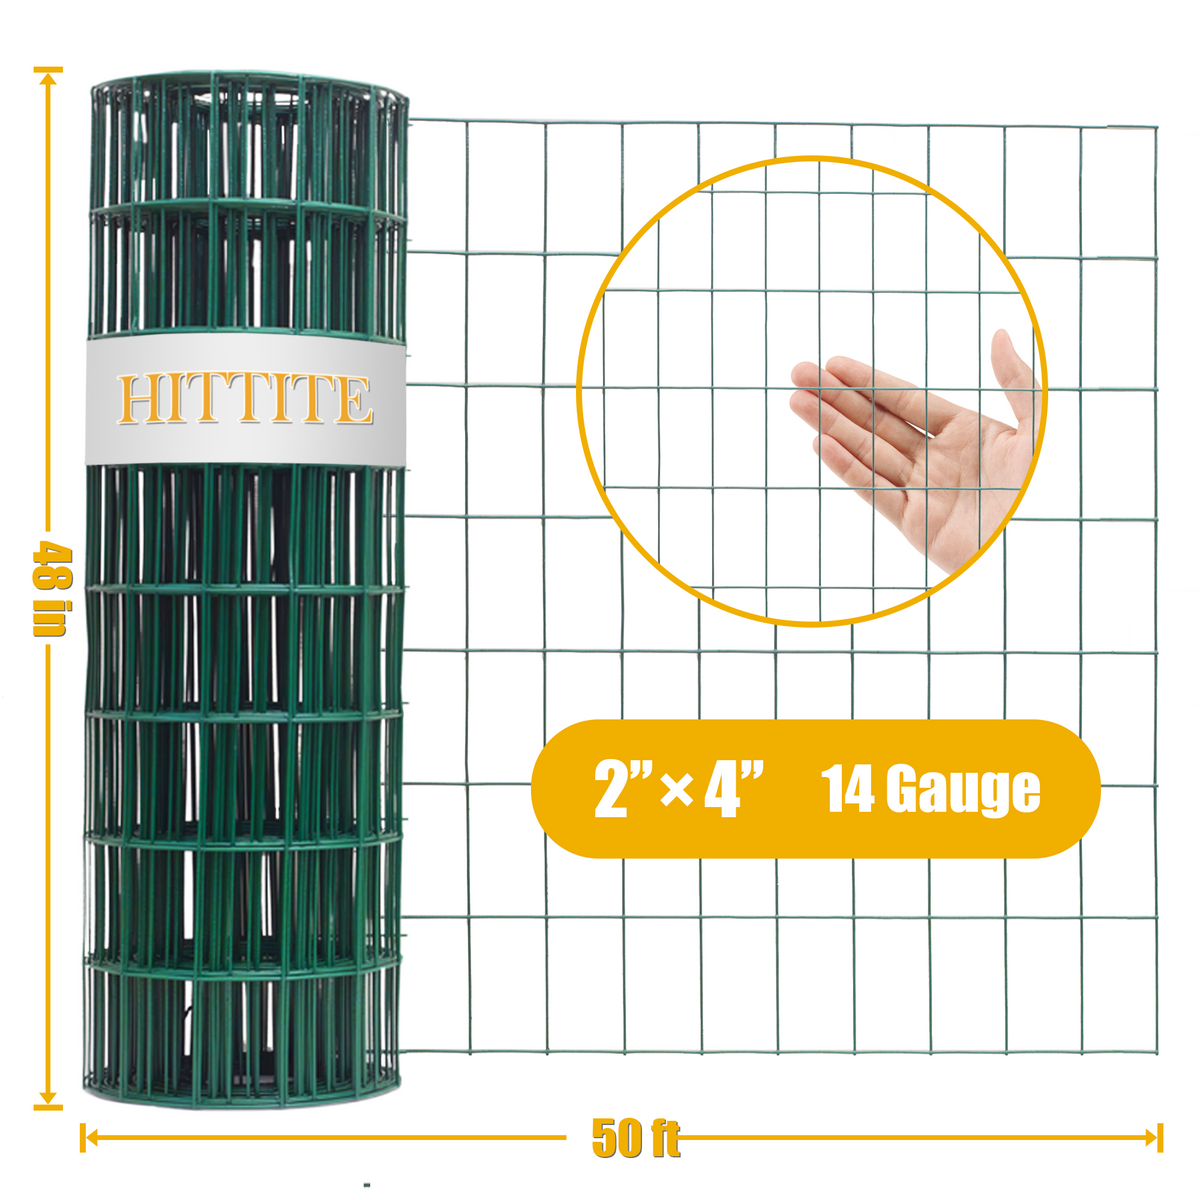 HITTITE Green PVC Coated Welded Wire Fencing, 48in x 50ft, 2 inch x 4 inch 14 GA Welded Wire Fence Rolls, Black Metal Garden Fence Wire Roll Garden Border Fencing for Yard Vegetable Plant Protection